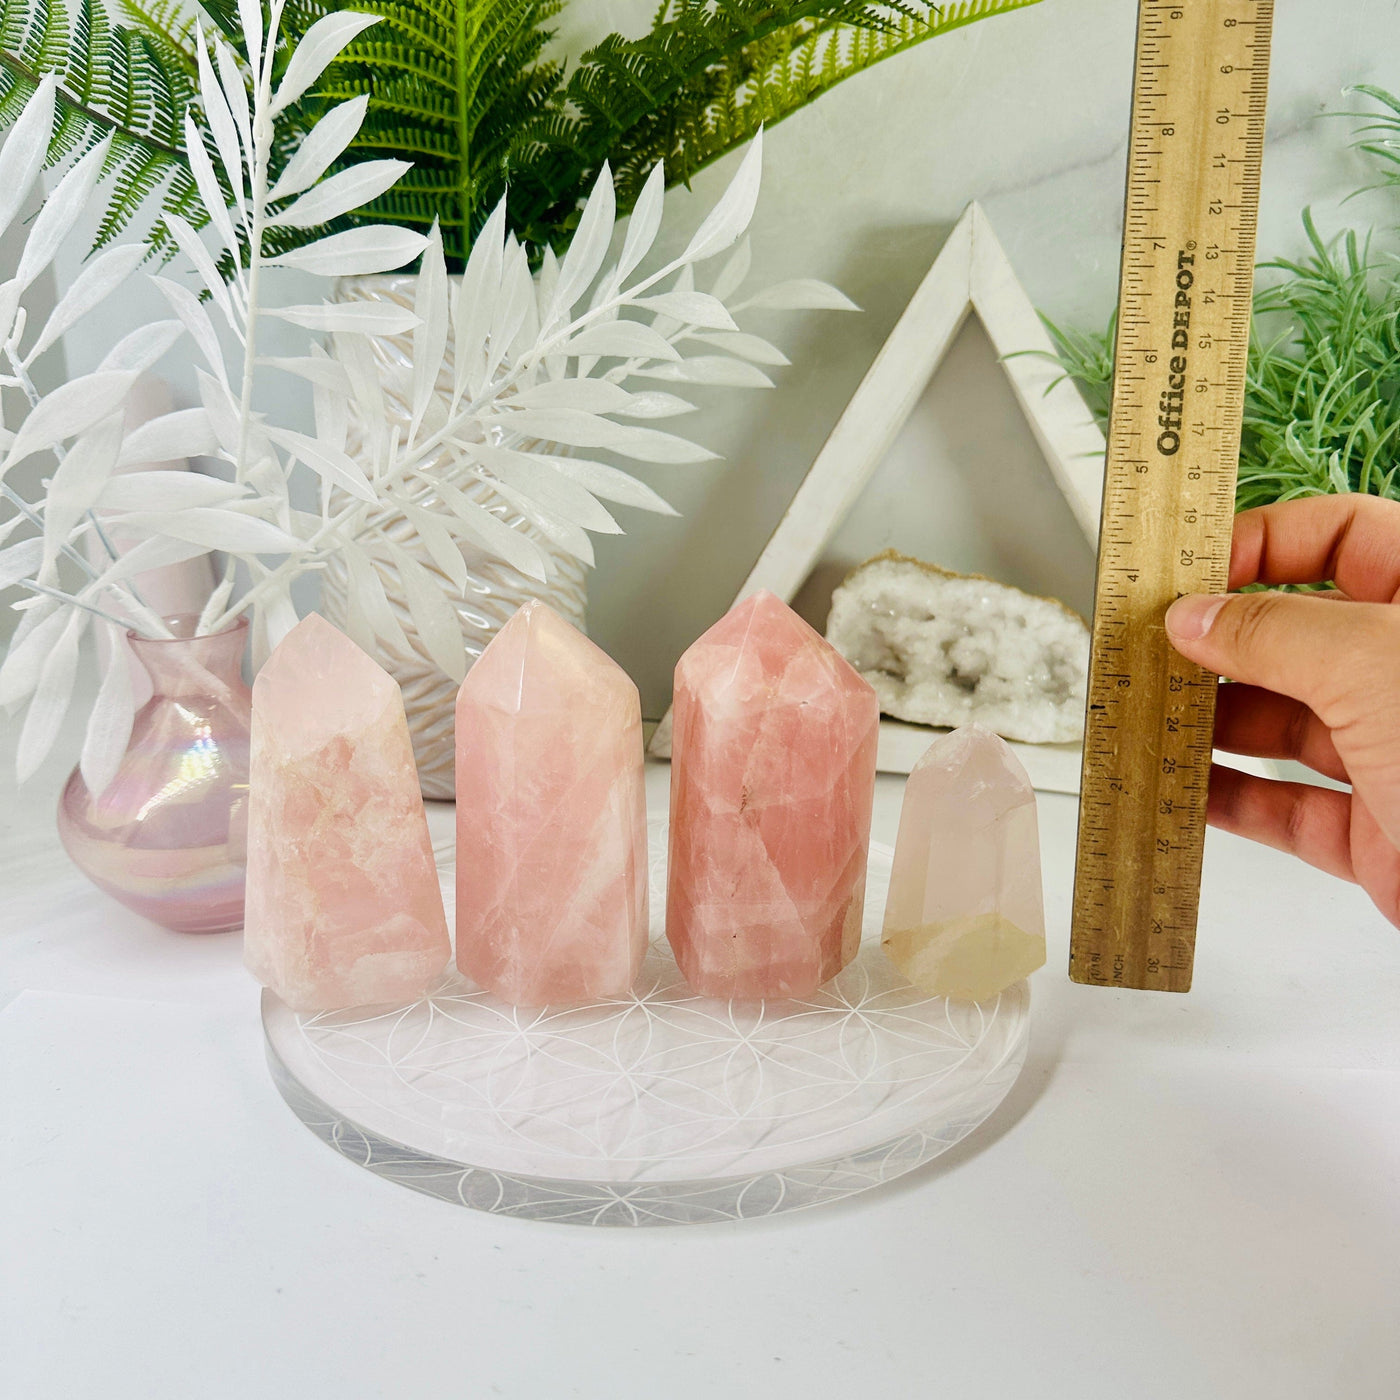  Rose Quartz Tower - Polished Points - You Choose all variants with ruler and hand for size reference